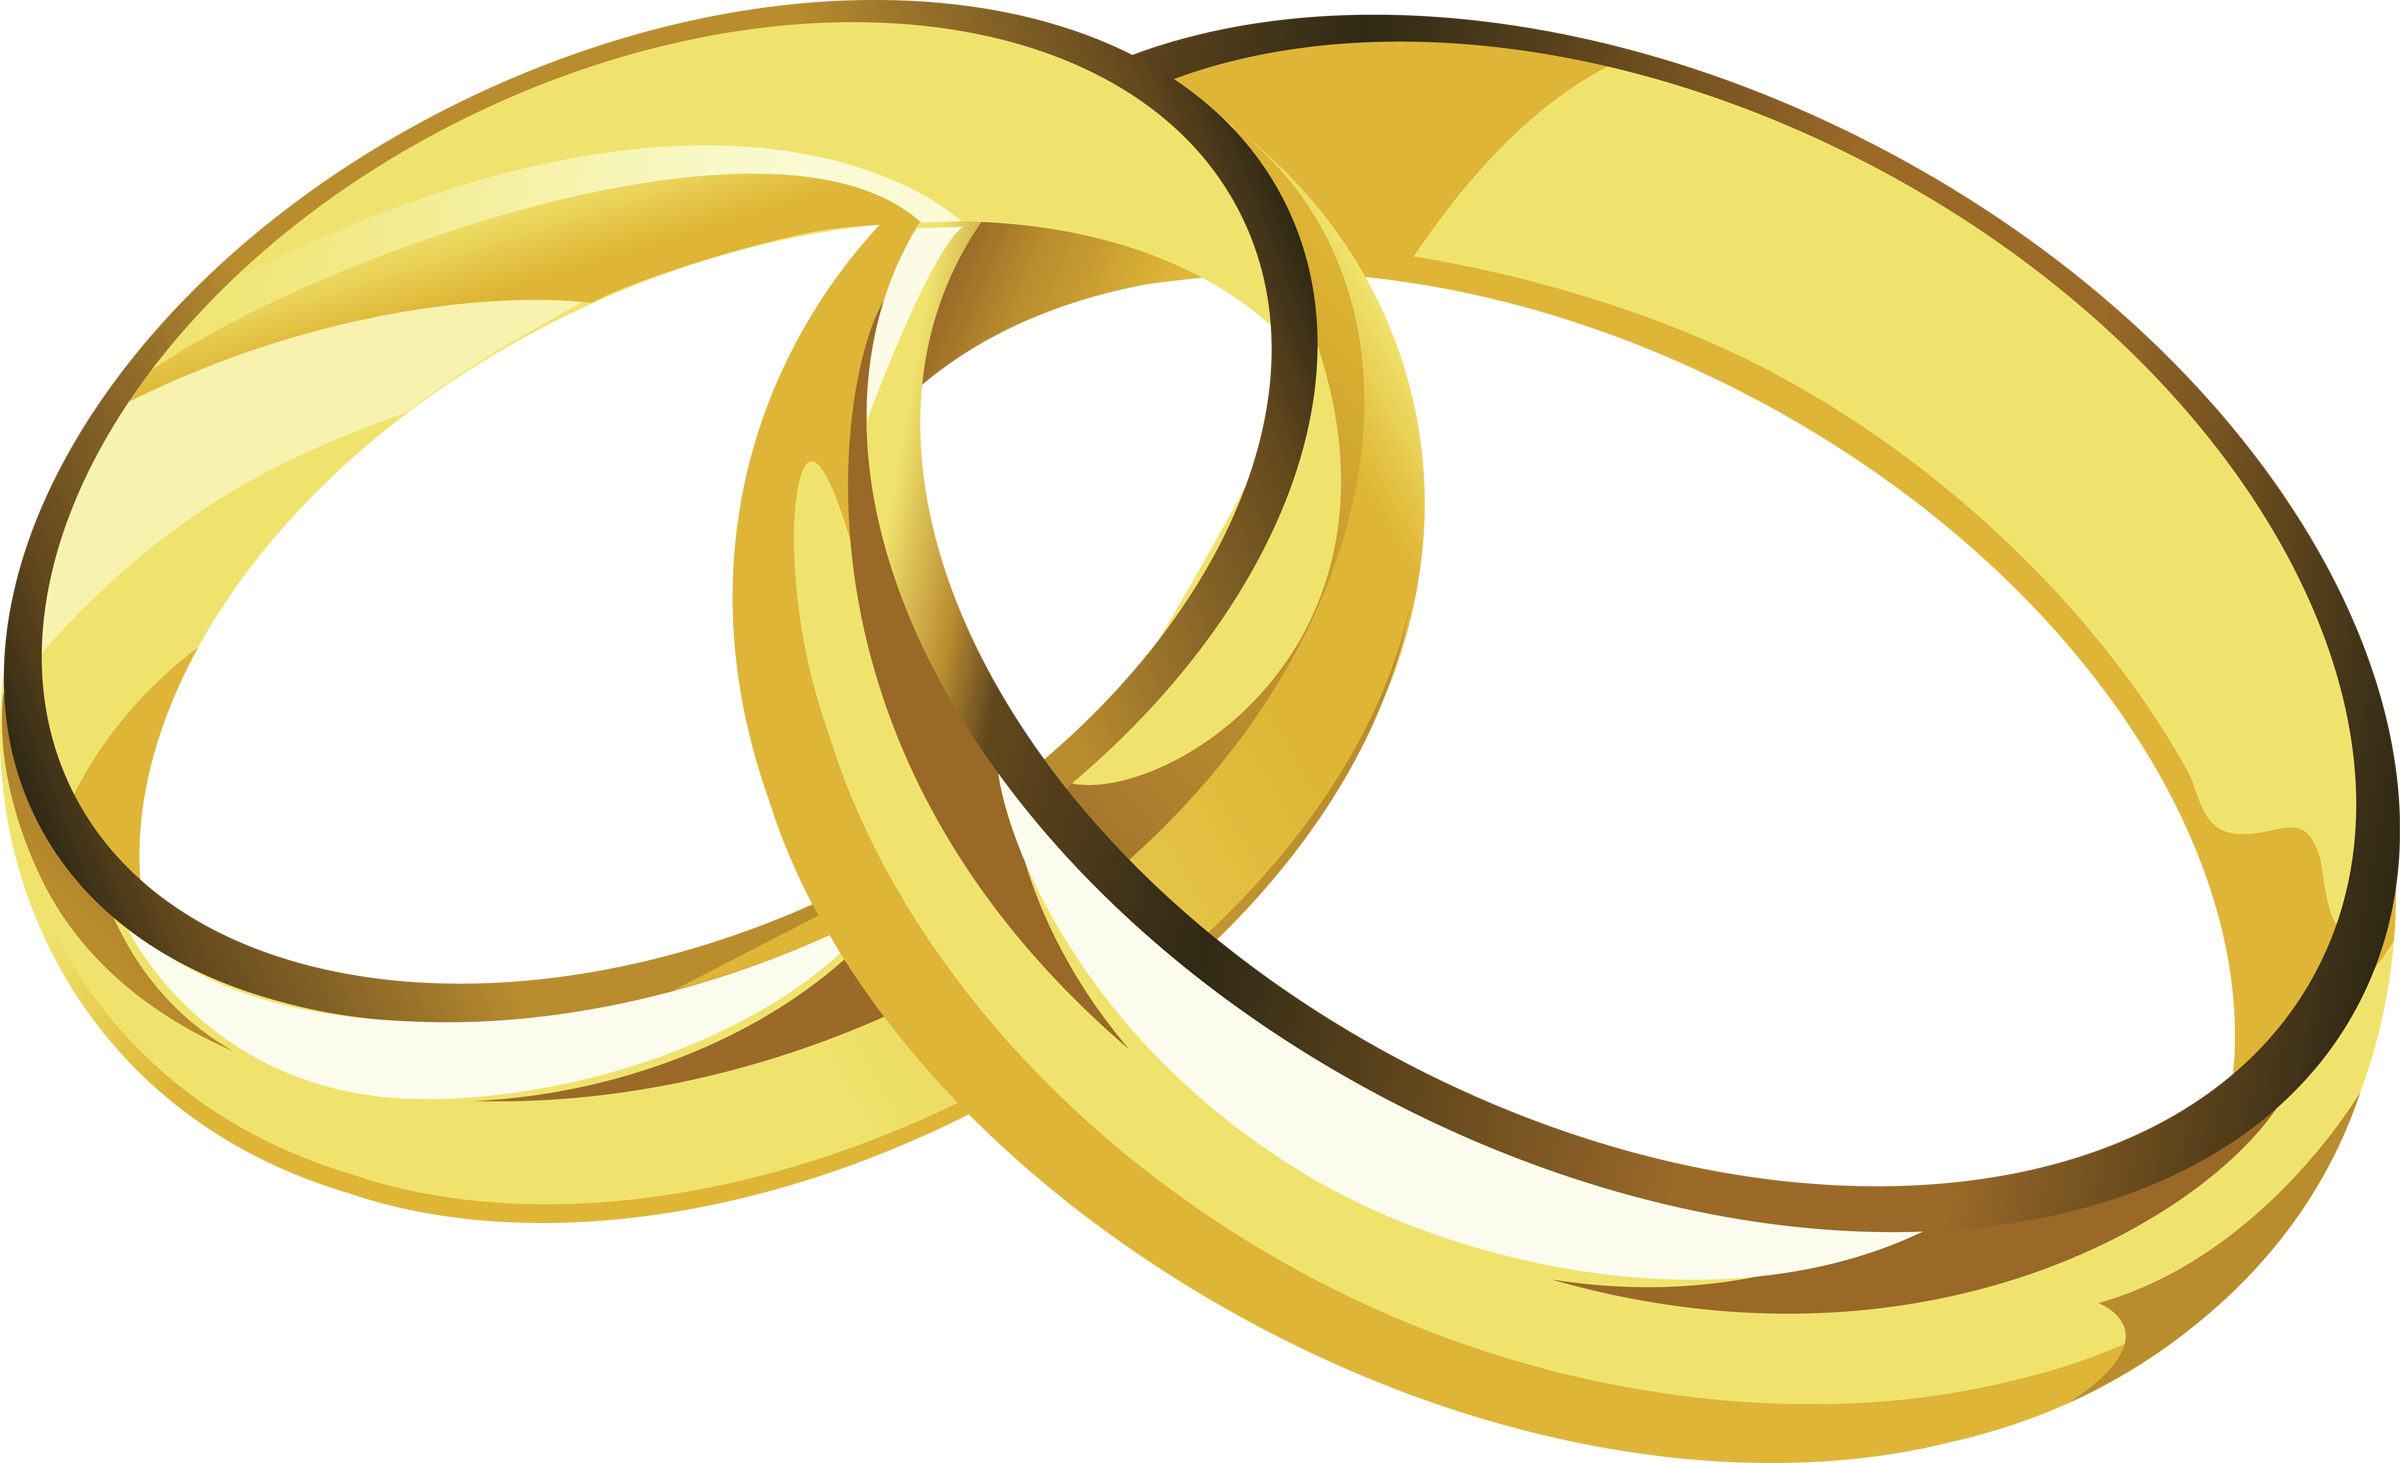 linked wedding rings clipart - photo #2